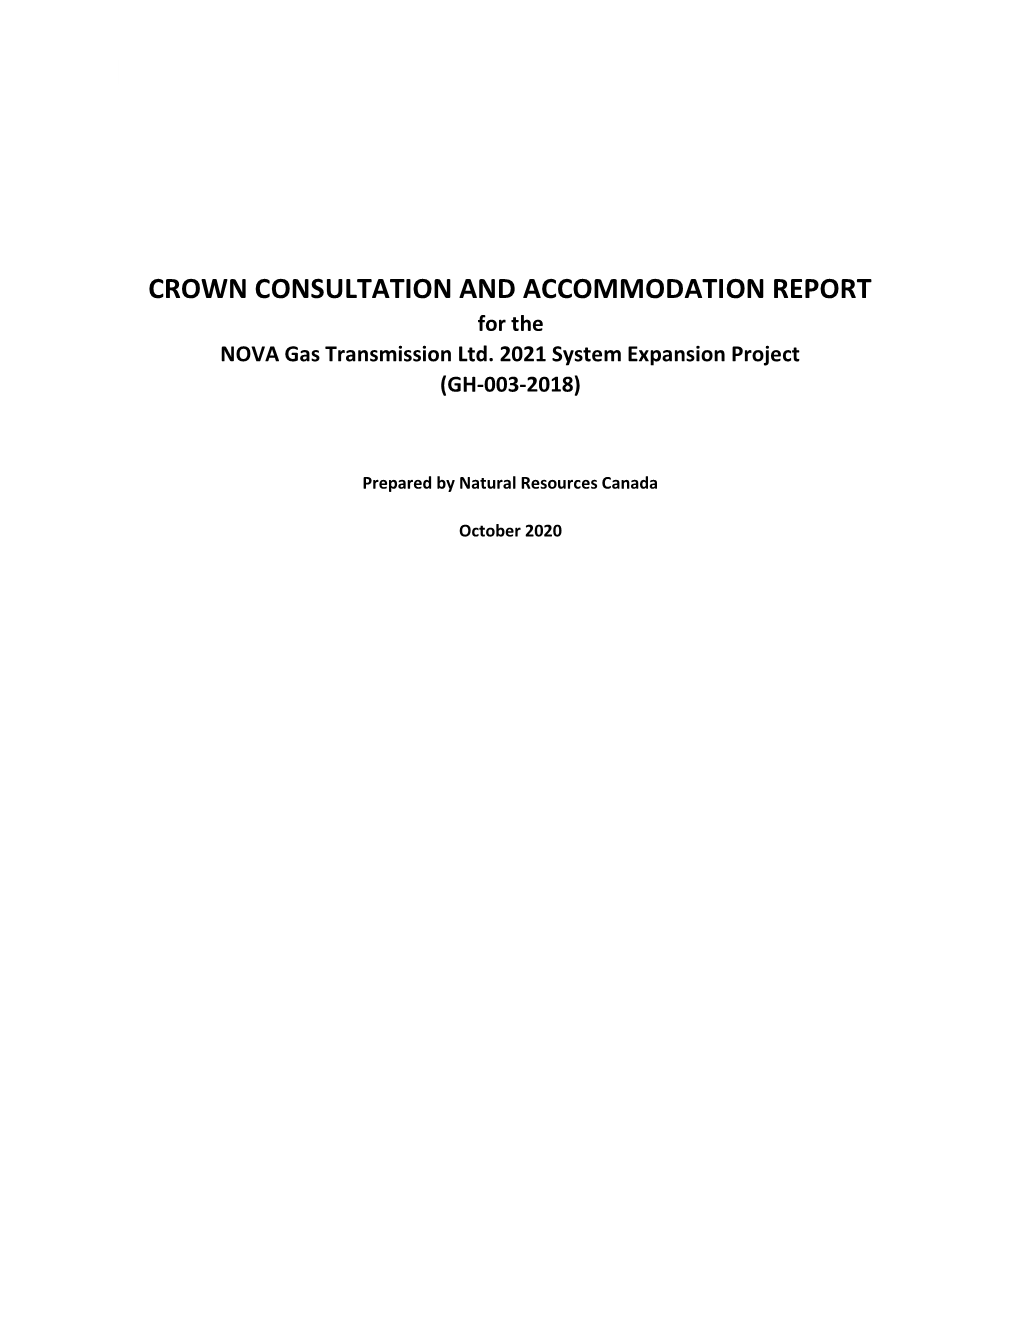 Crown Consultation and Accommodation Report (CCAR)